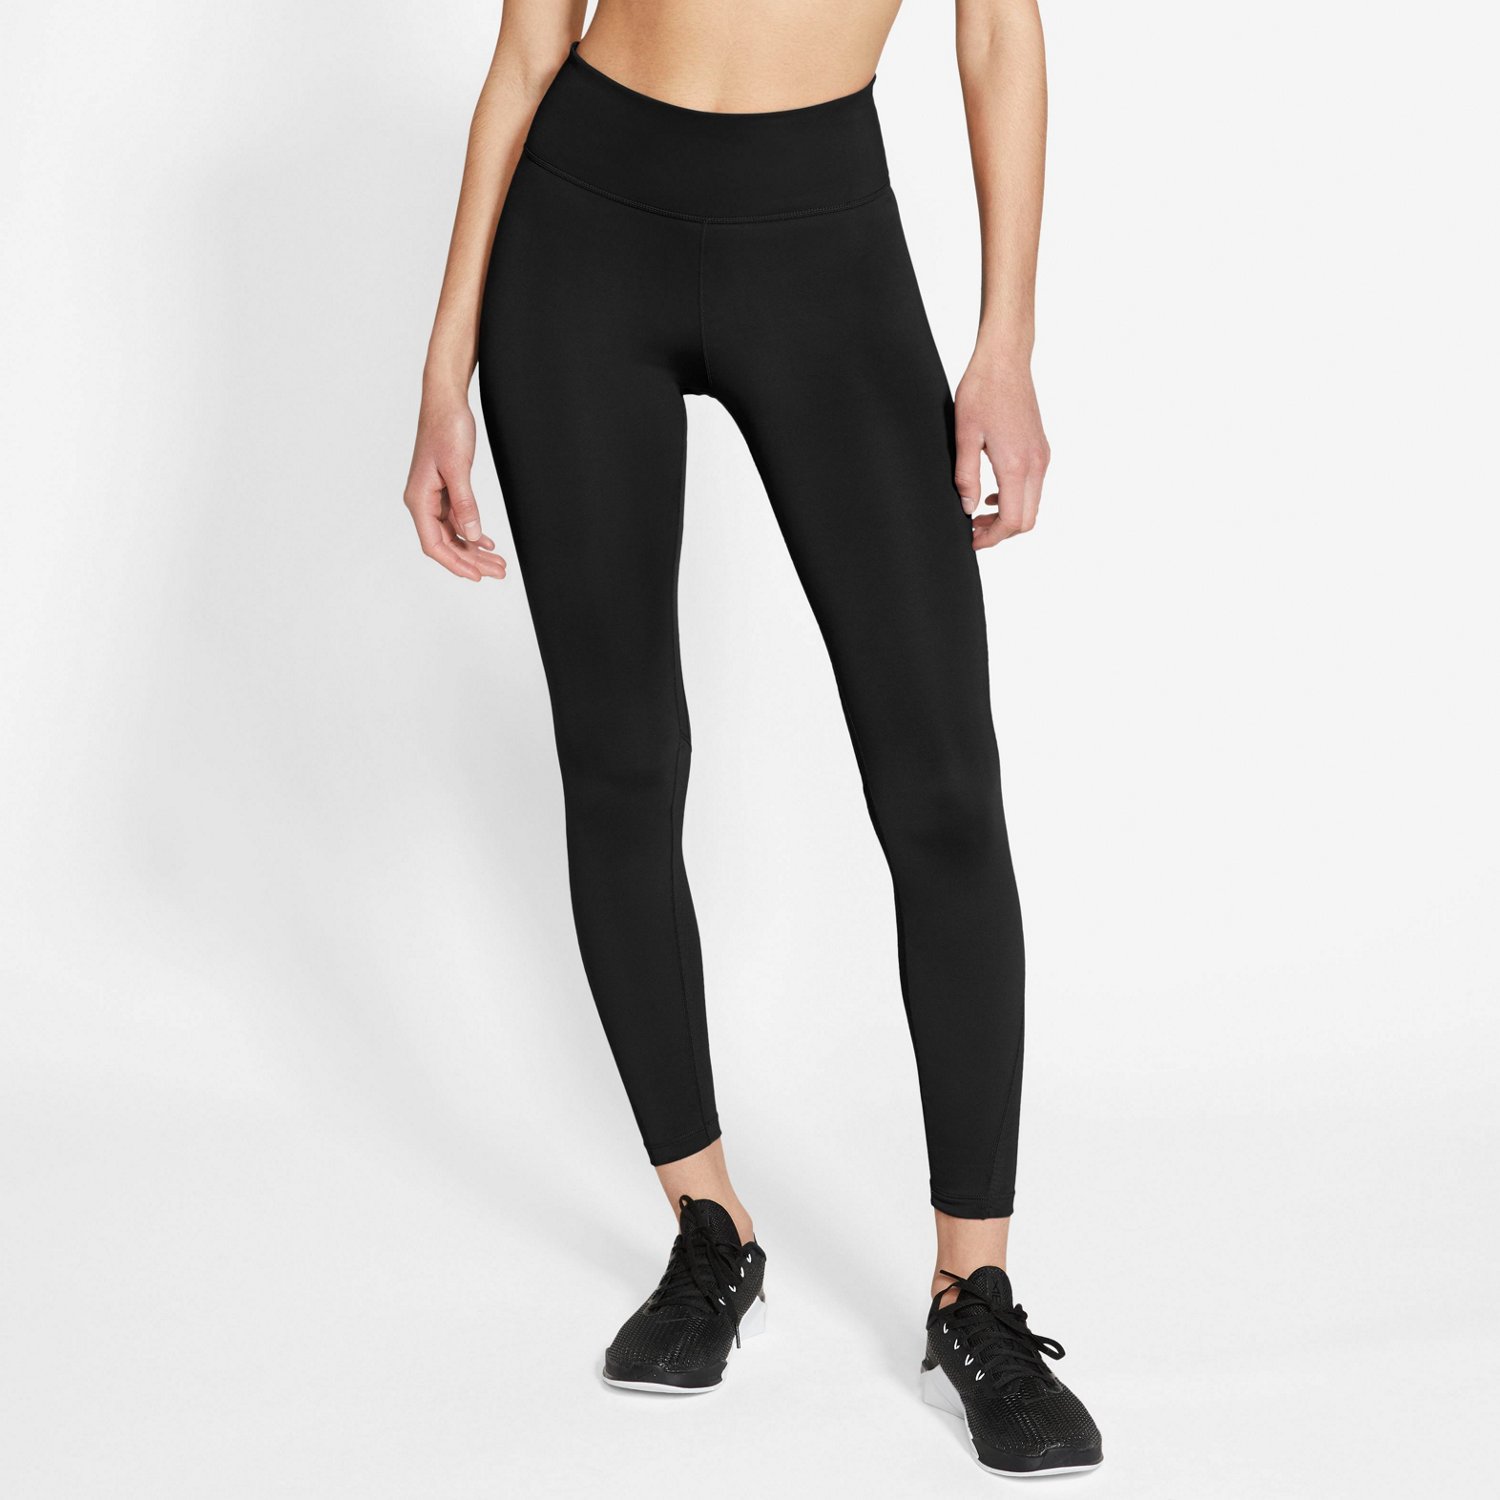 Nike Womens One Mid Rise 2.0 7/8 Tights